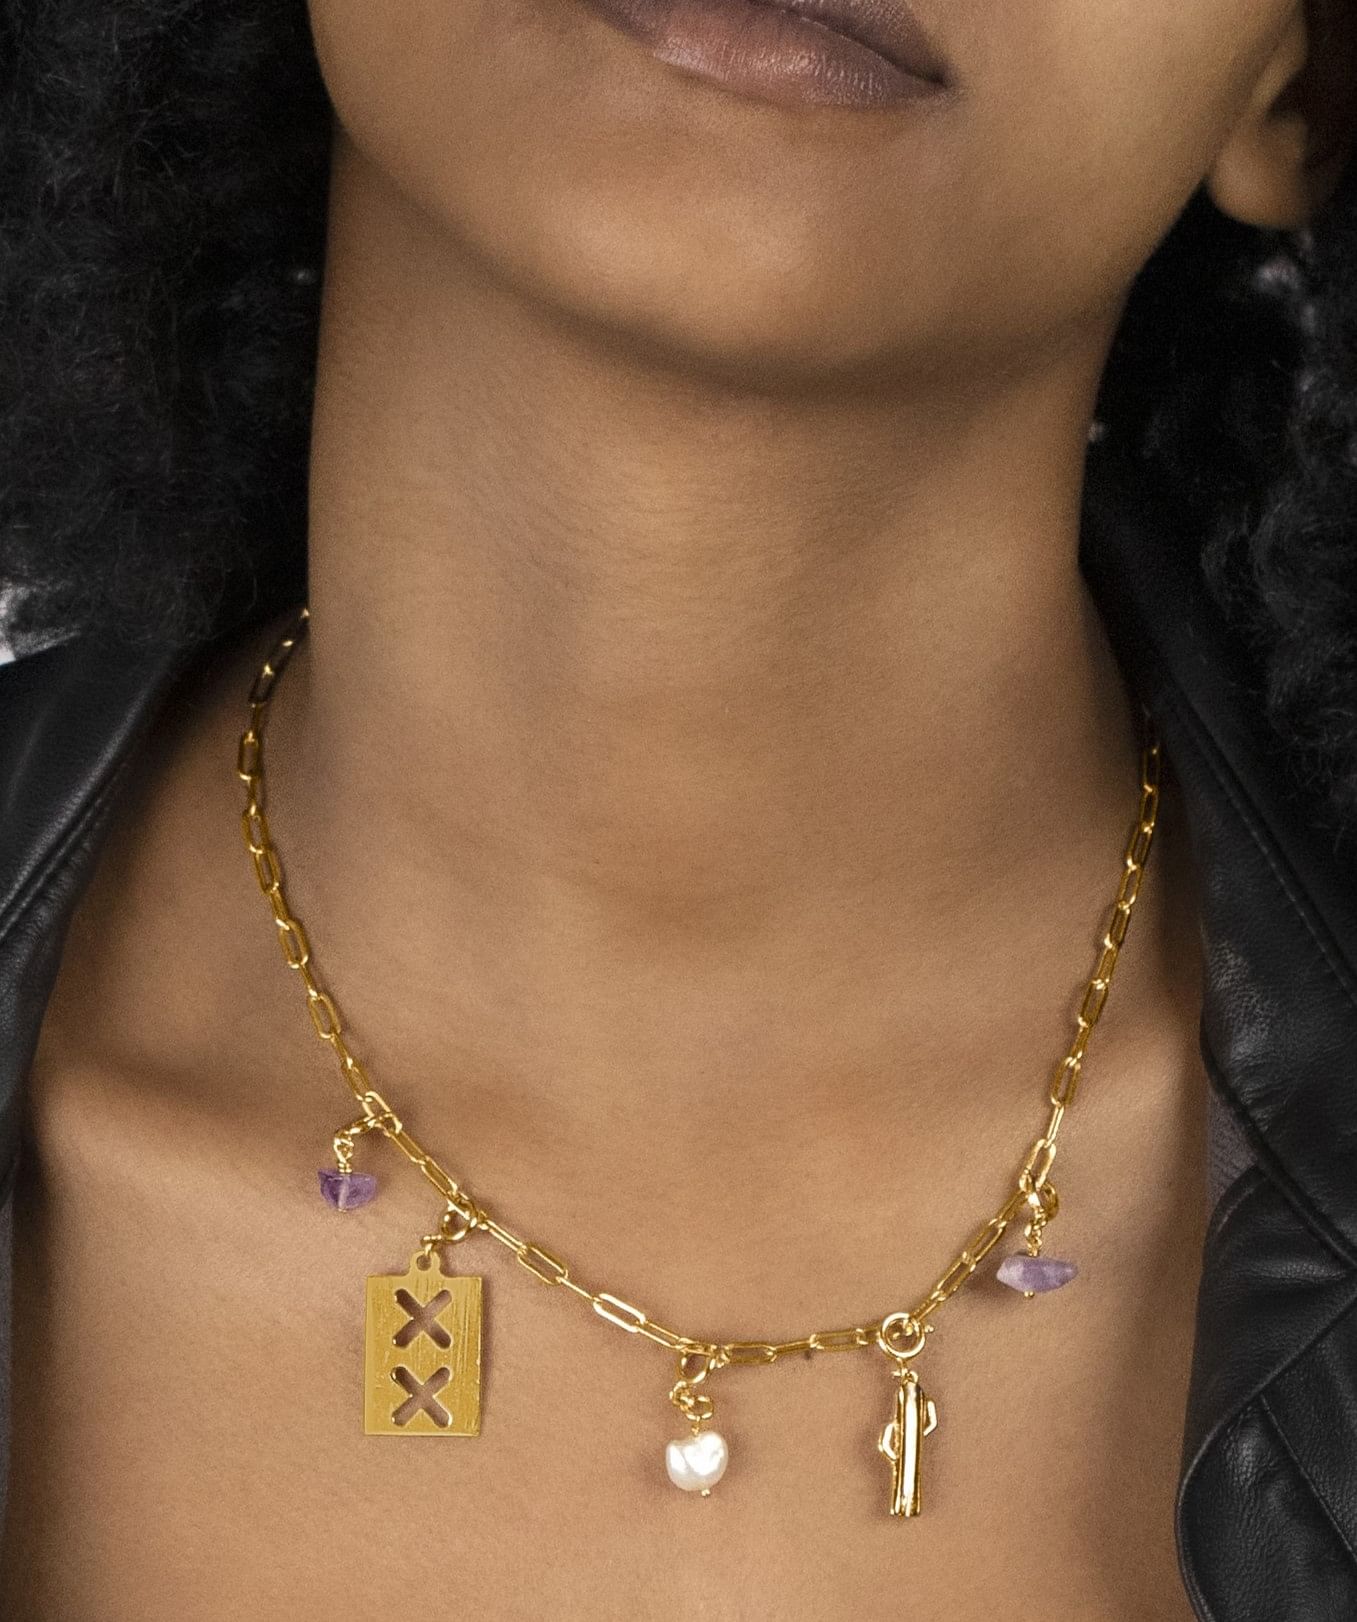 The Go-Getter Necklace